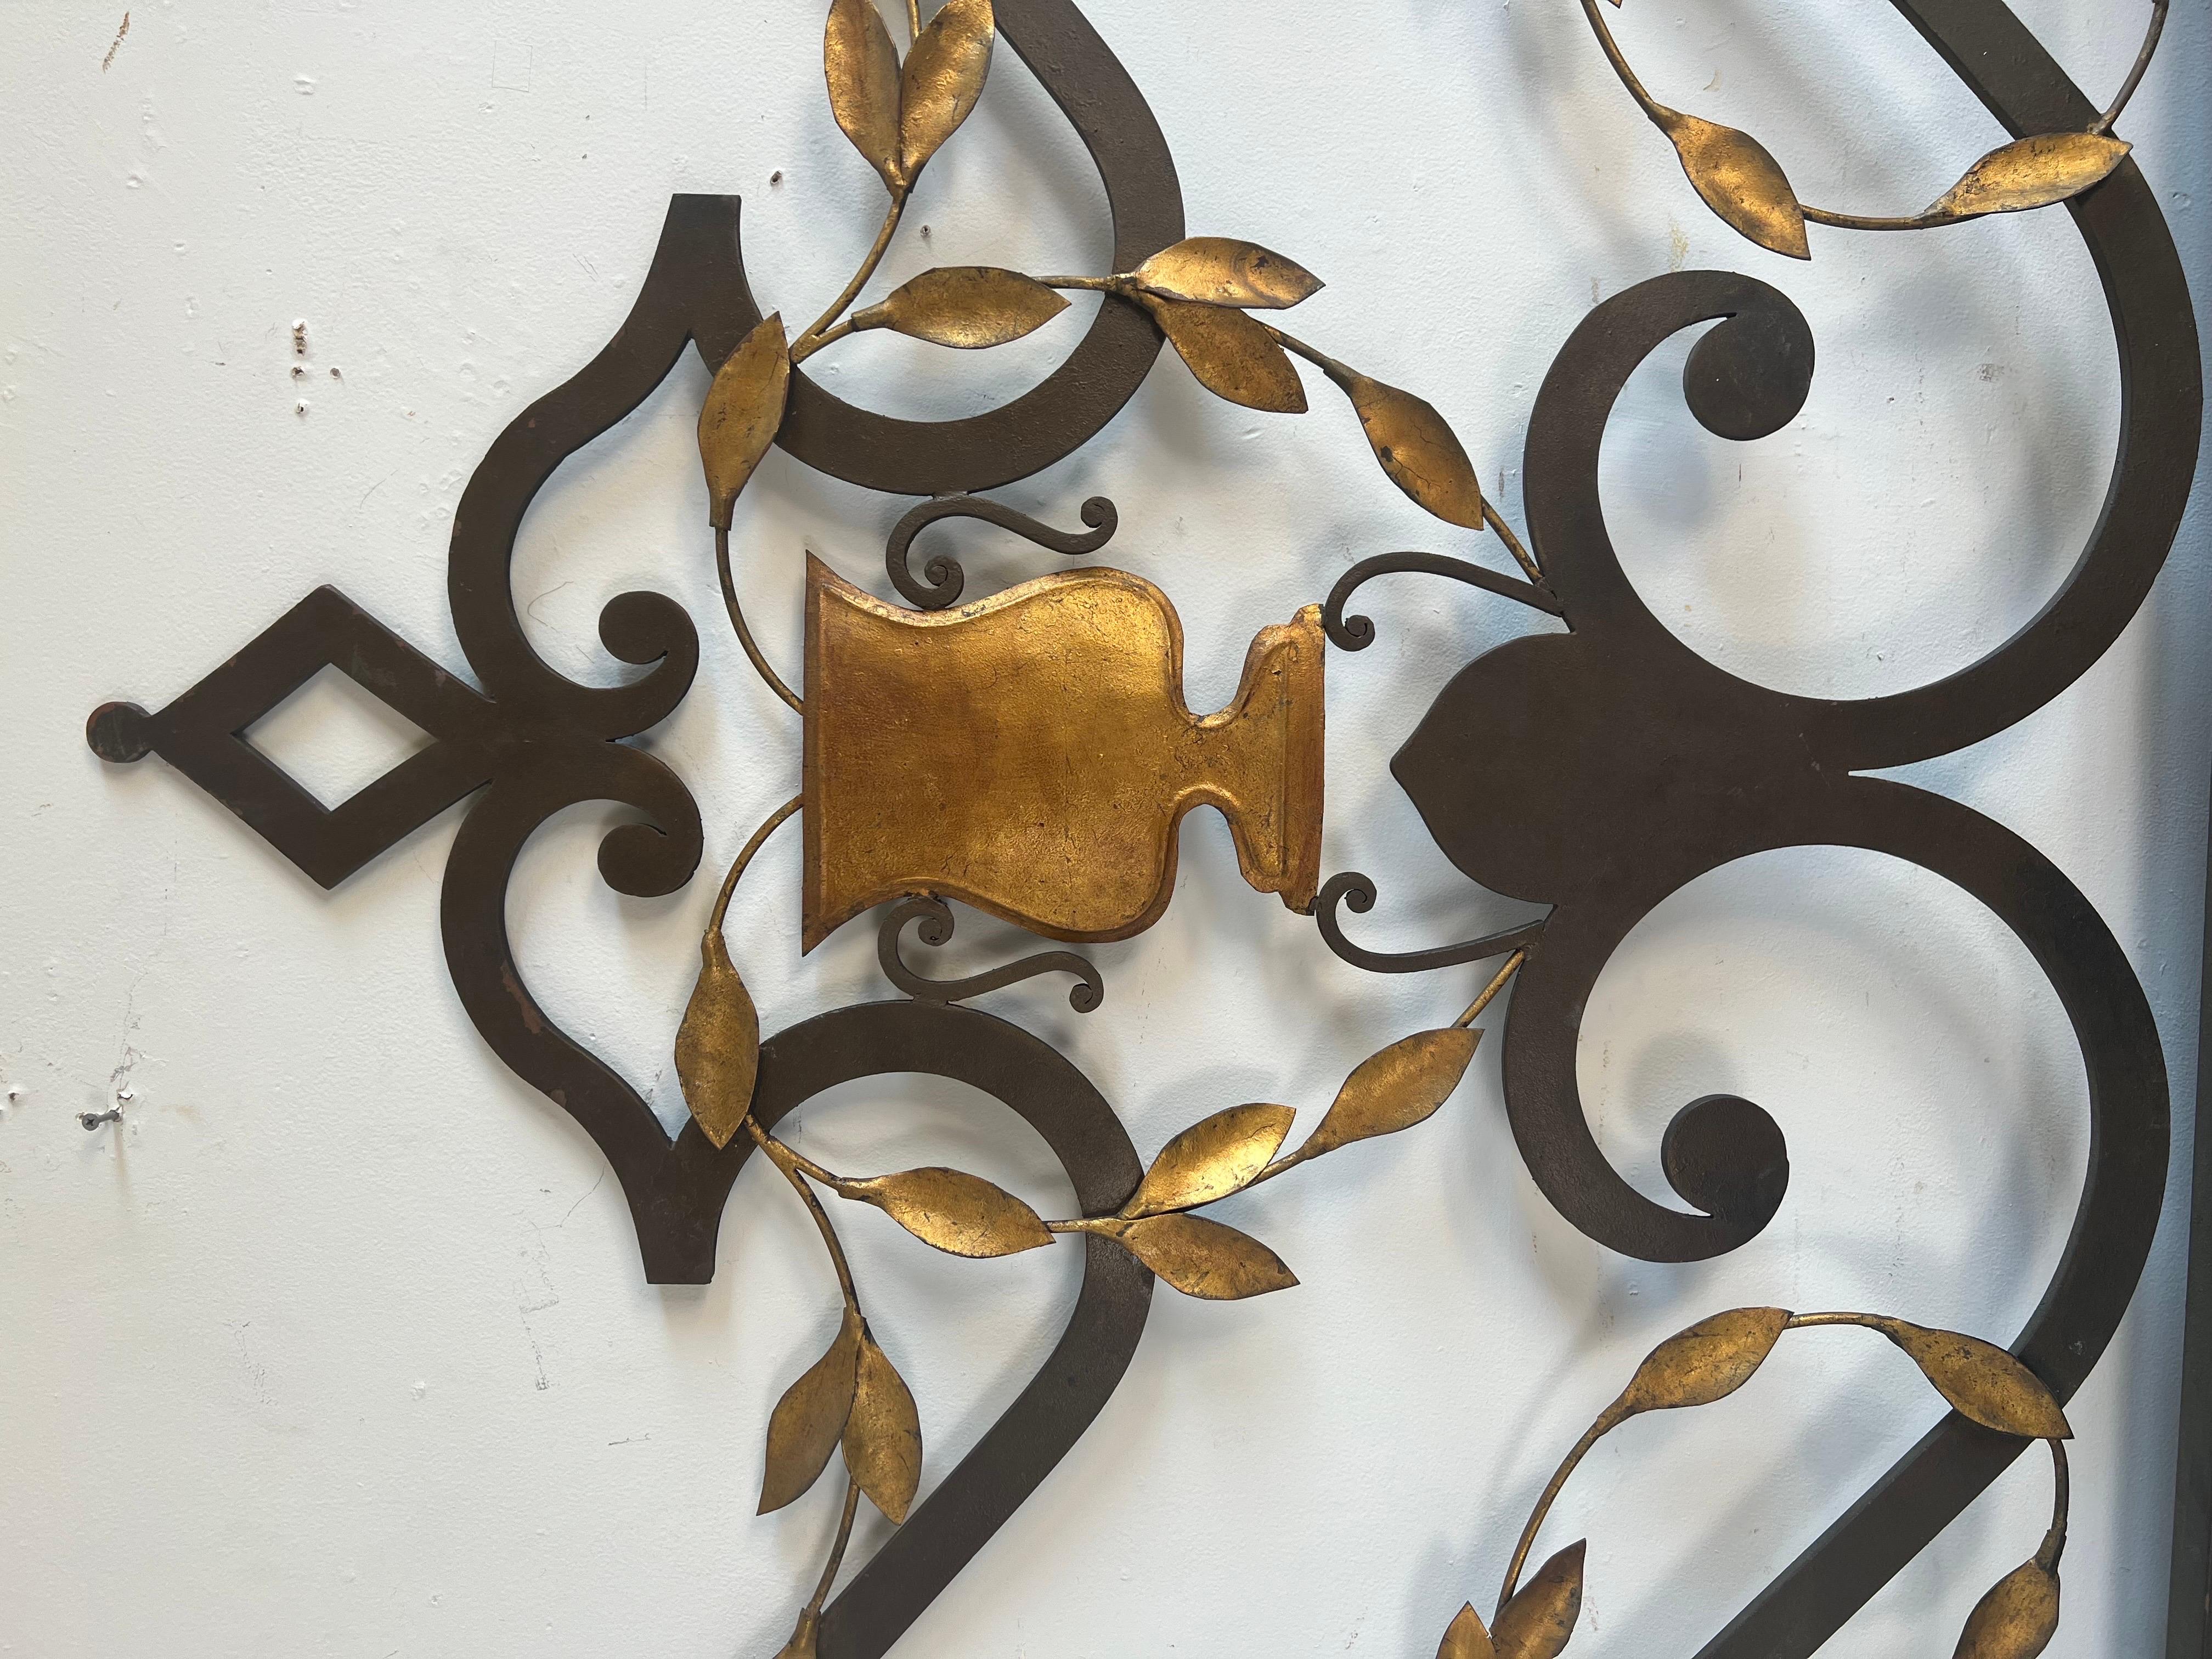 Mid-20th Century Spanish Wrought Iron Headboard with Gold Leaf Urn Center